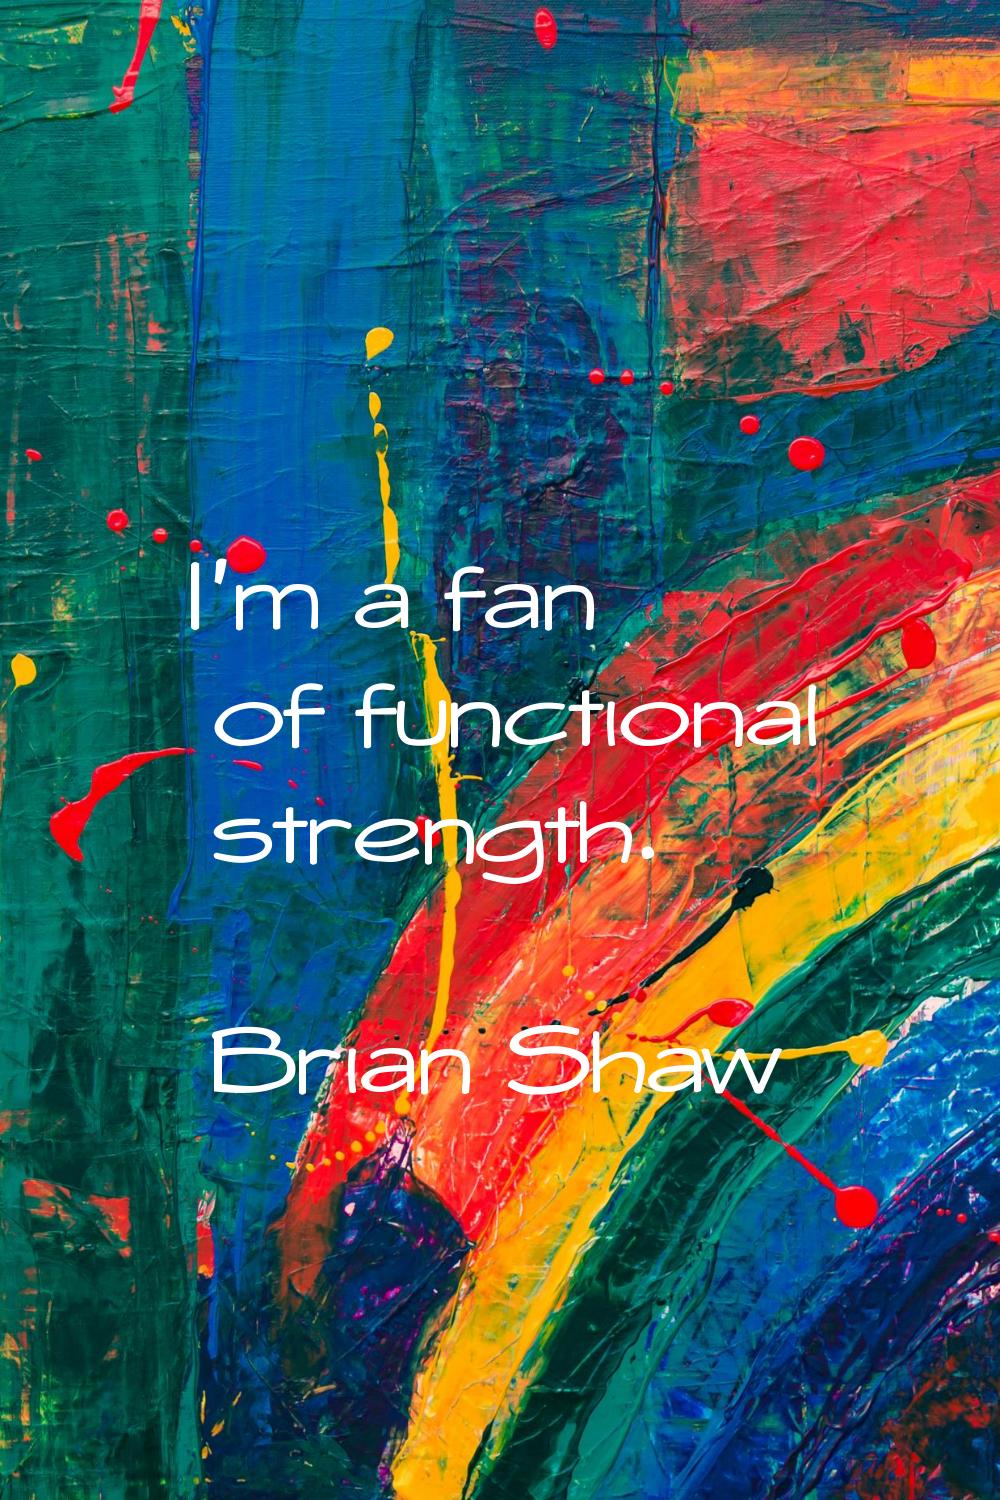 I'm a fan of functional strength.